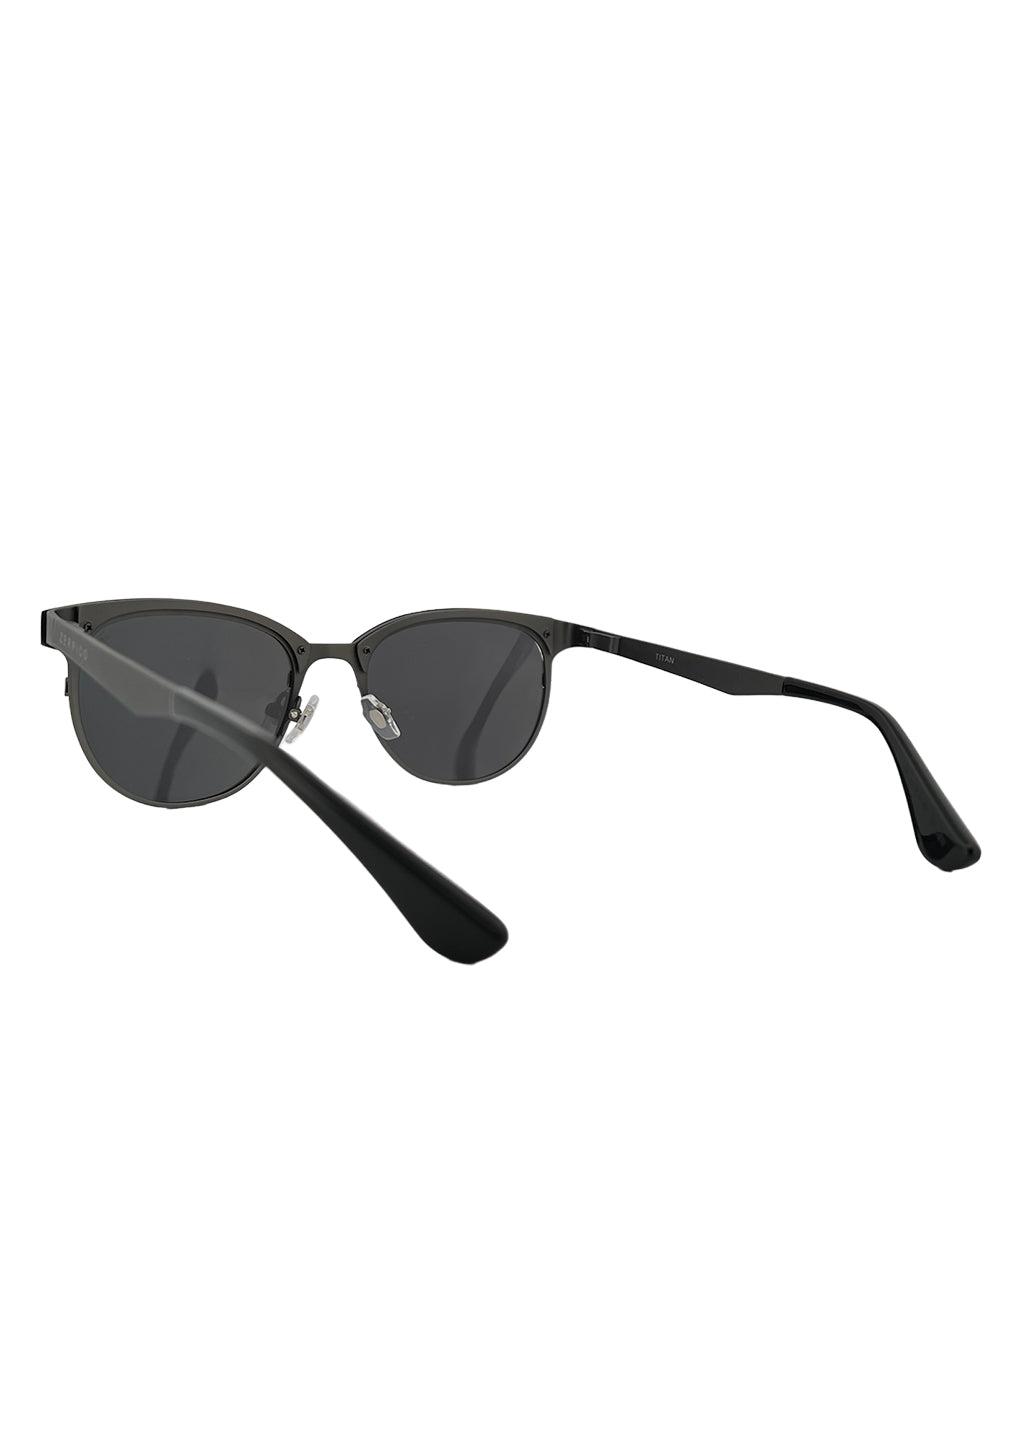 Ray-Ban RB 3716 CLUBMASTER METAL Sunglasses | FREE Shipping